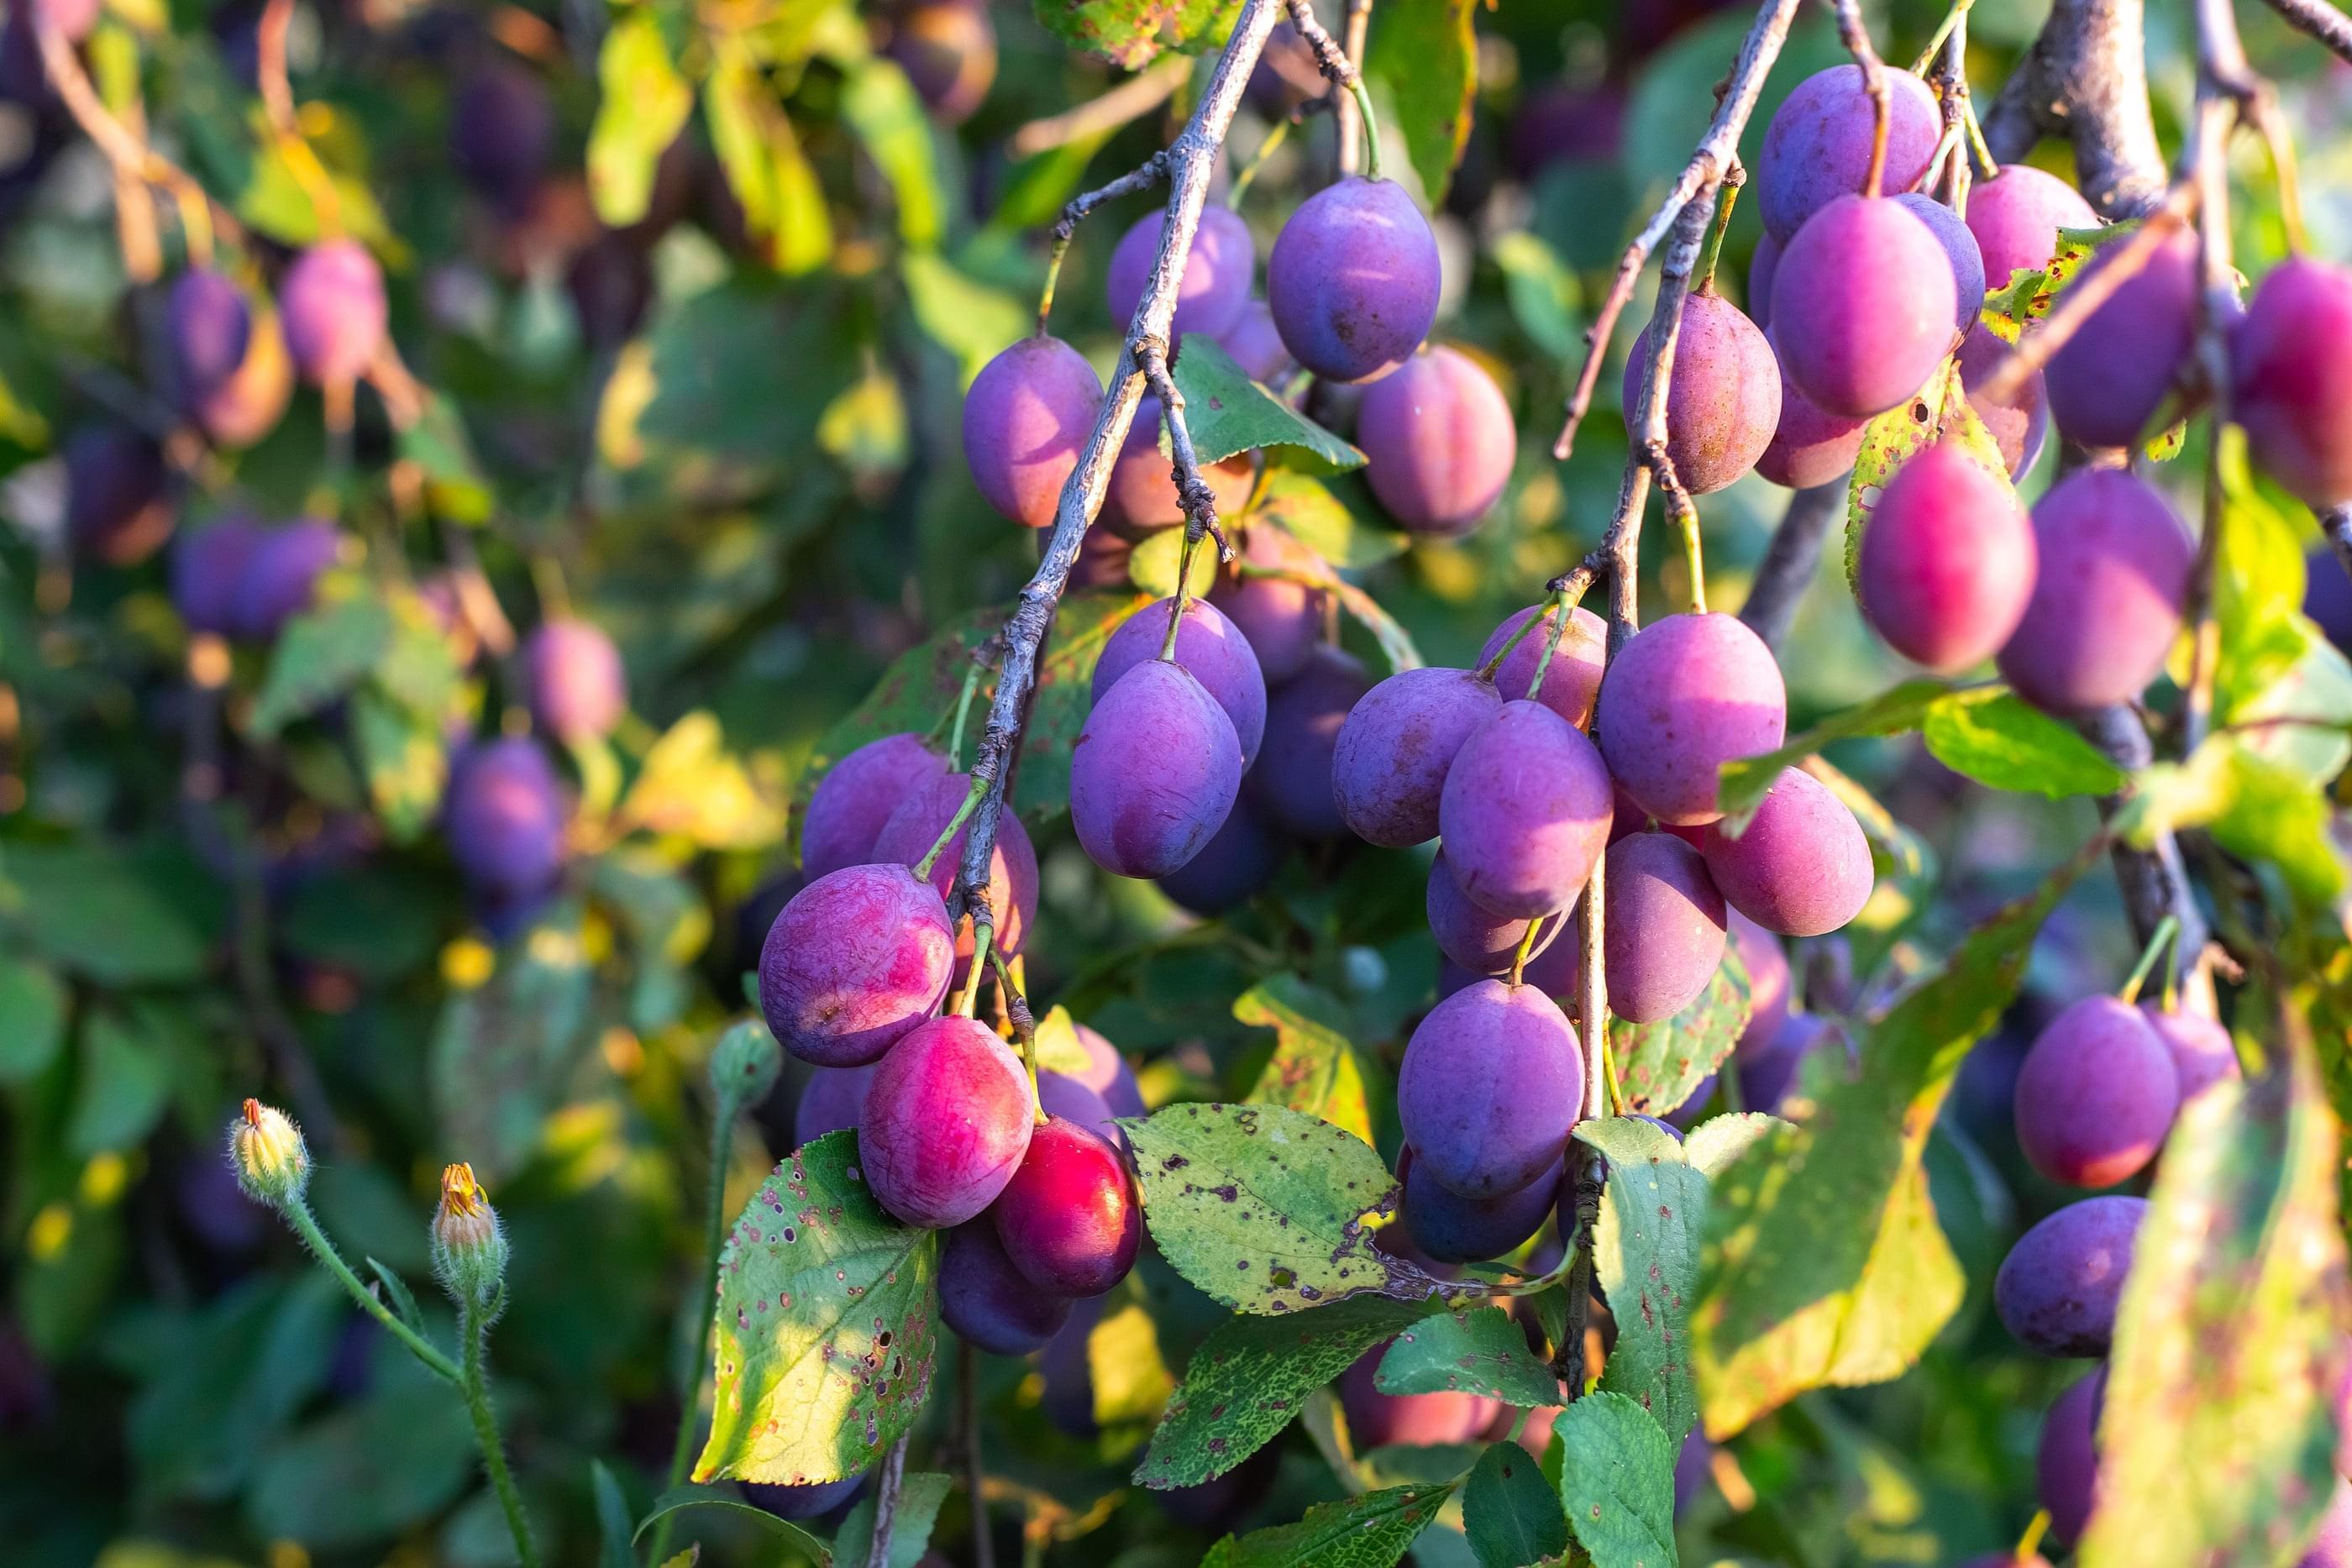 Purple-red plums on the tree in the setting sun